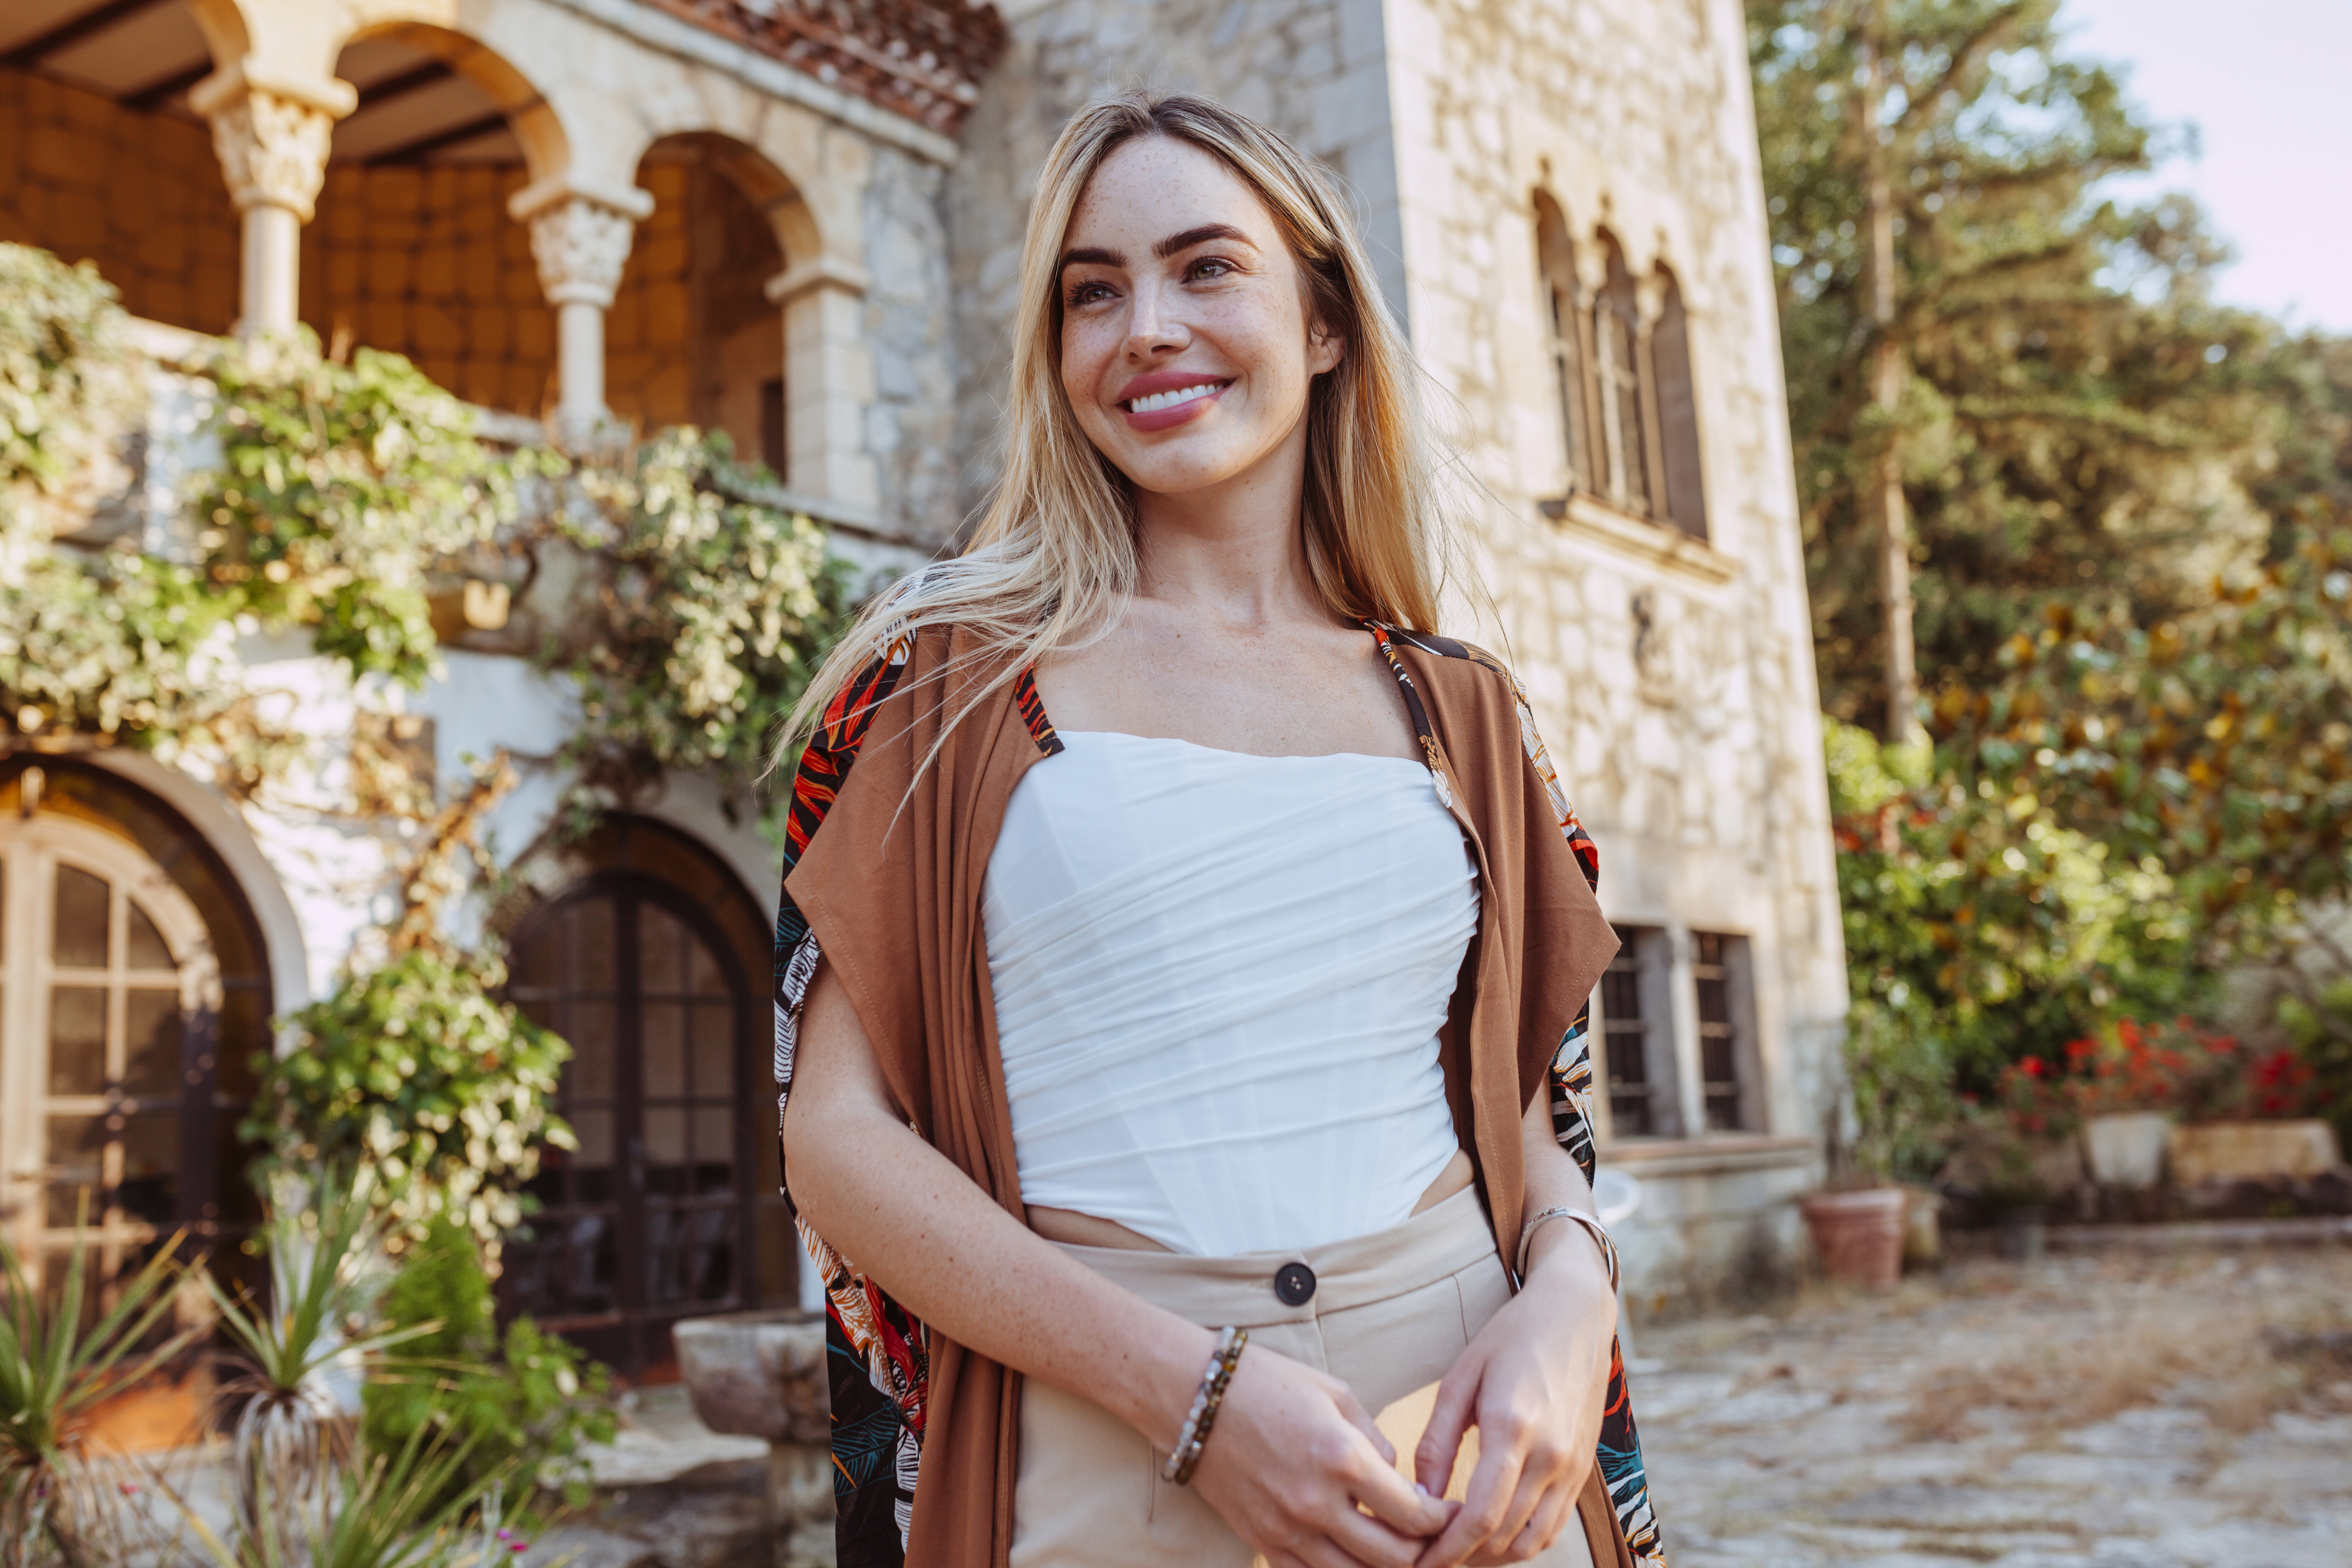 Joyful young woman smiling in front of a beautiful villa, showcasing a radiant and healthy smile from Princeton Prosthodontics